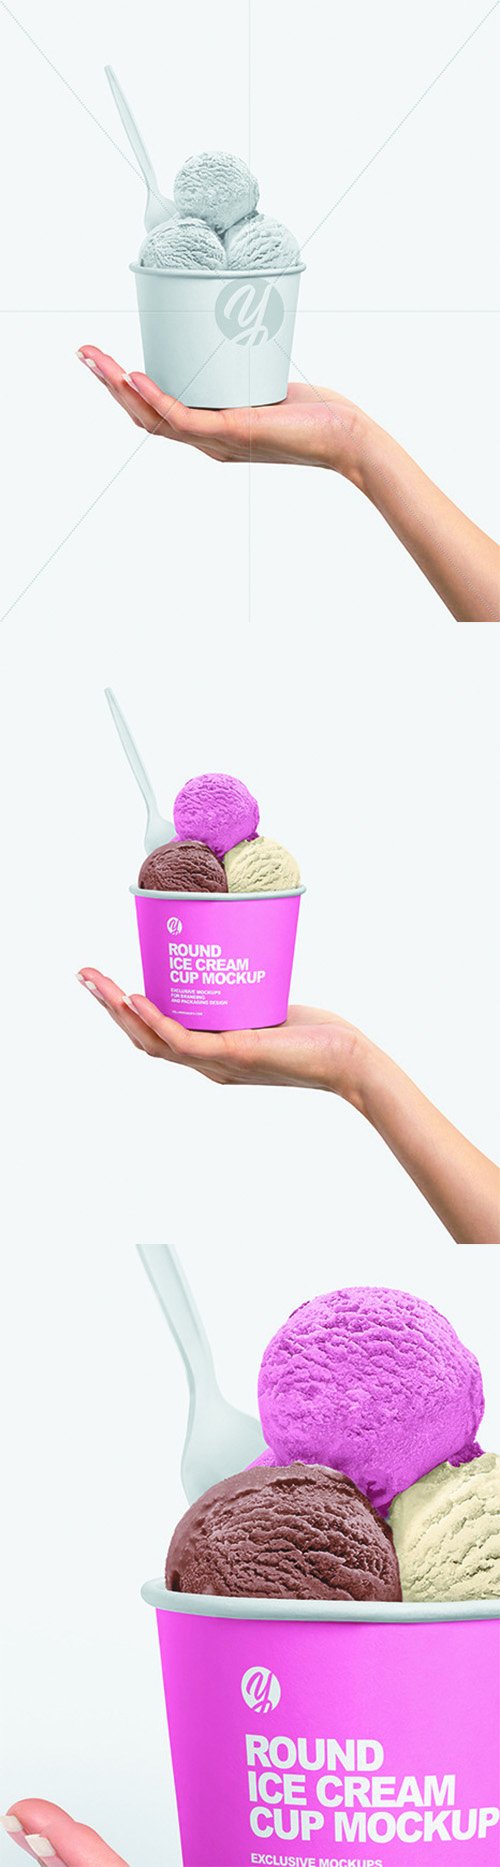 Paper Ice Cream Cup in Hand Mockup 66138 TIF